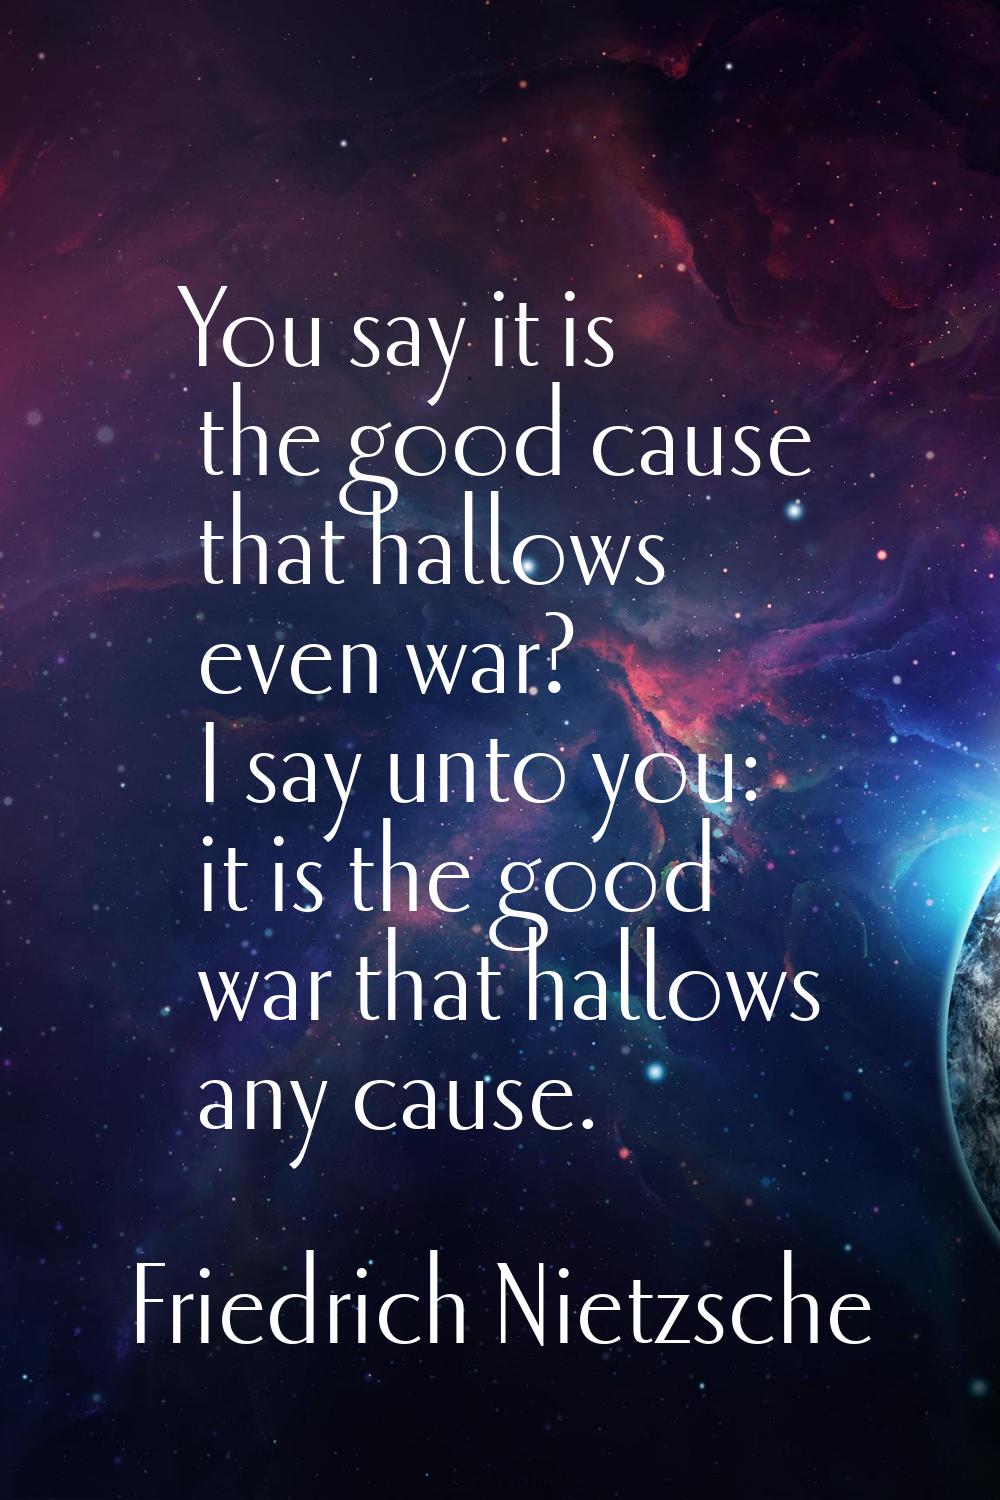 You say it is the good cause that hallows even war? I say unto you: it is the good war that hallows